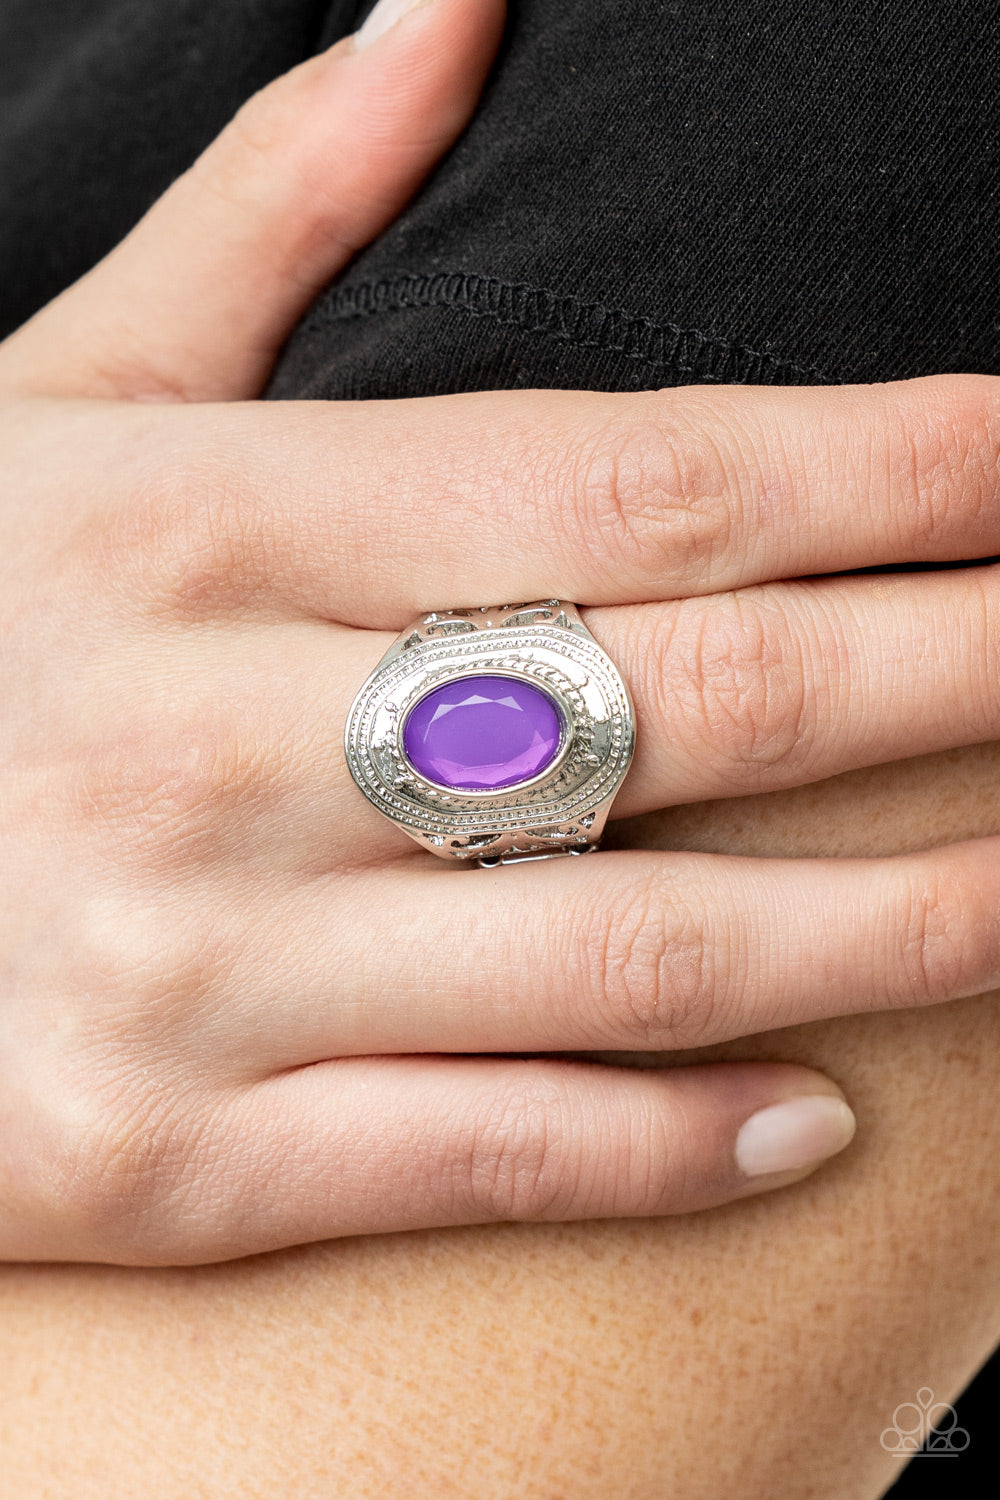 Calm And Classy - Purple ring